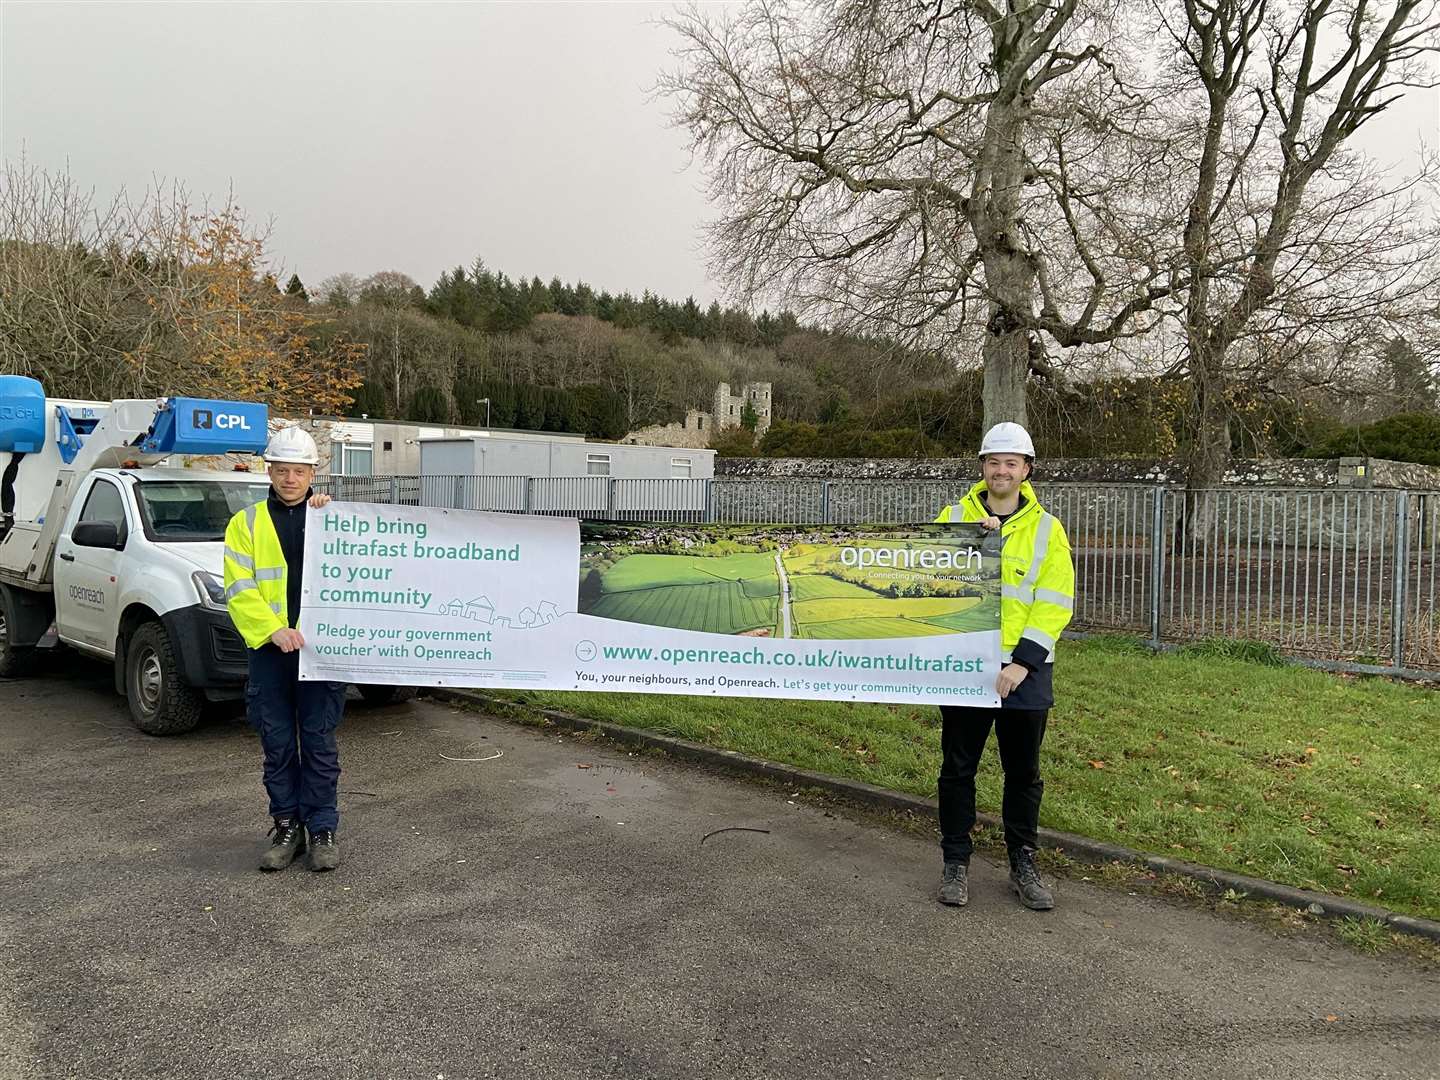 Local engineers Jake Hynes and Steven Cowie launch the broadband campaign in Ellon.